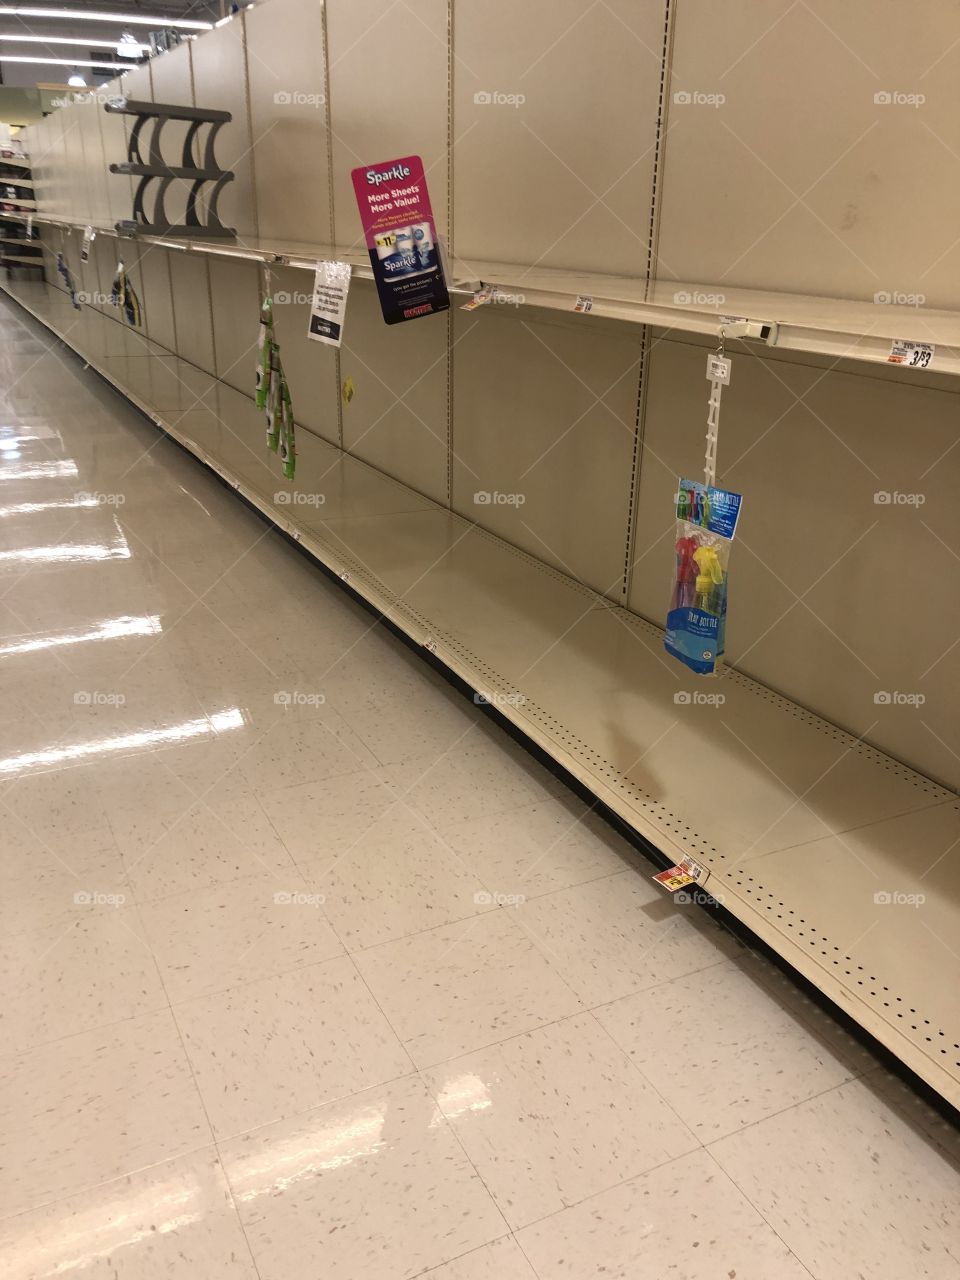 Beginning of the pandemic of 2020 grocery store panic empty shelves 